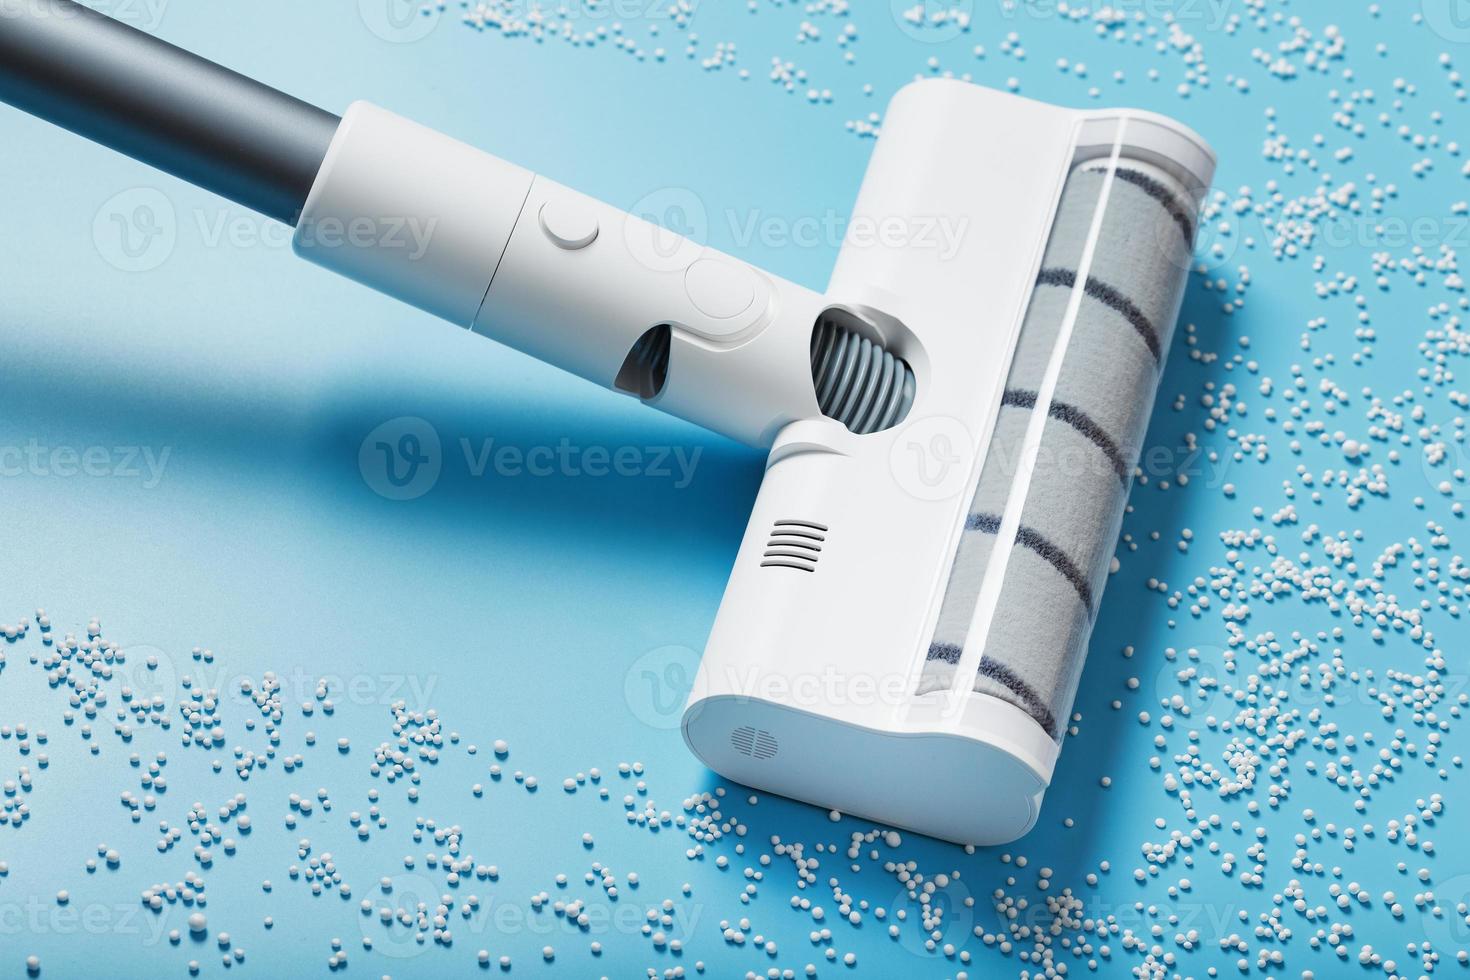 The turbo brush of the vacuum cleaner cleans white balls, top view on a blue background. The concept of cleanliness and cleaning. photo